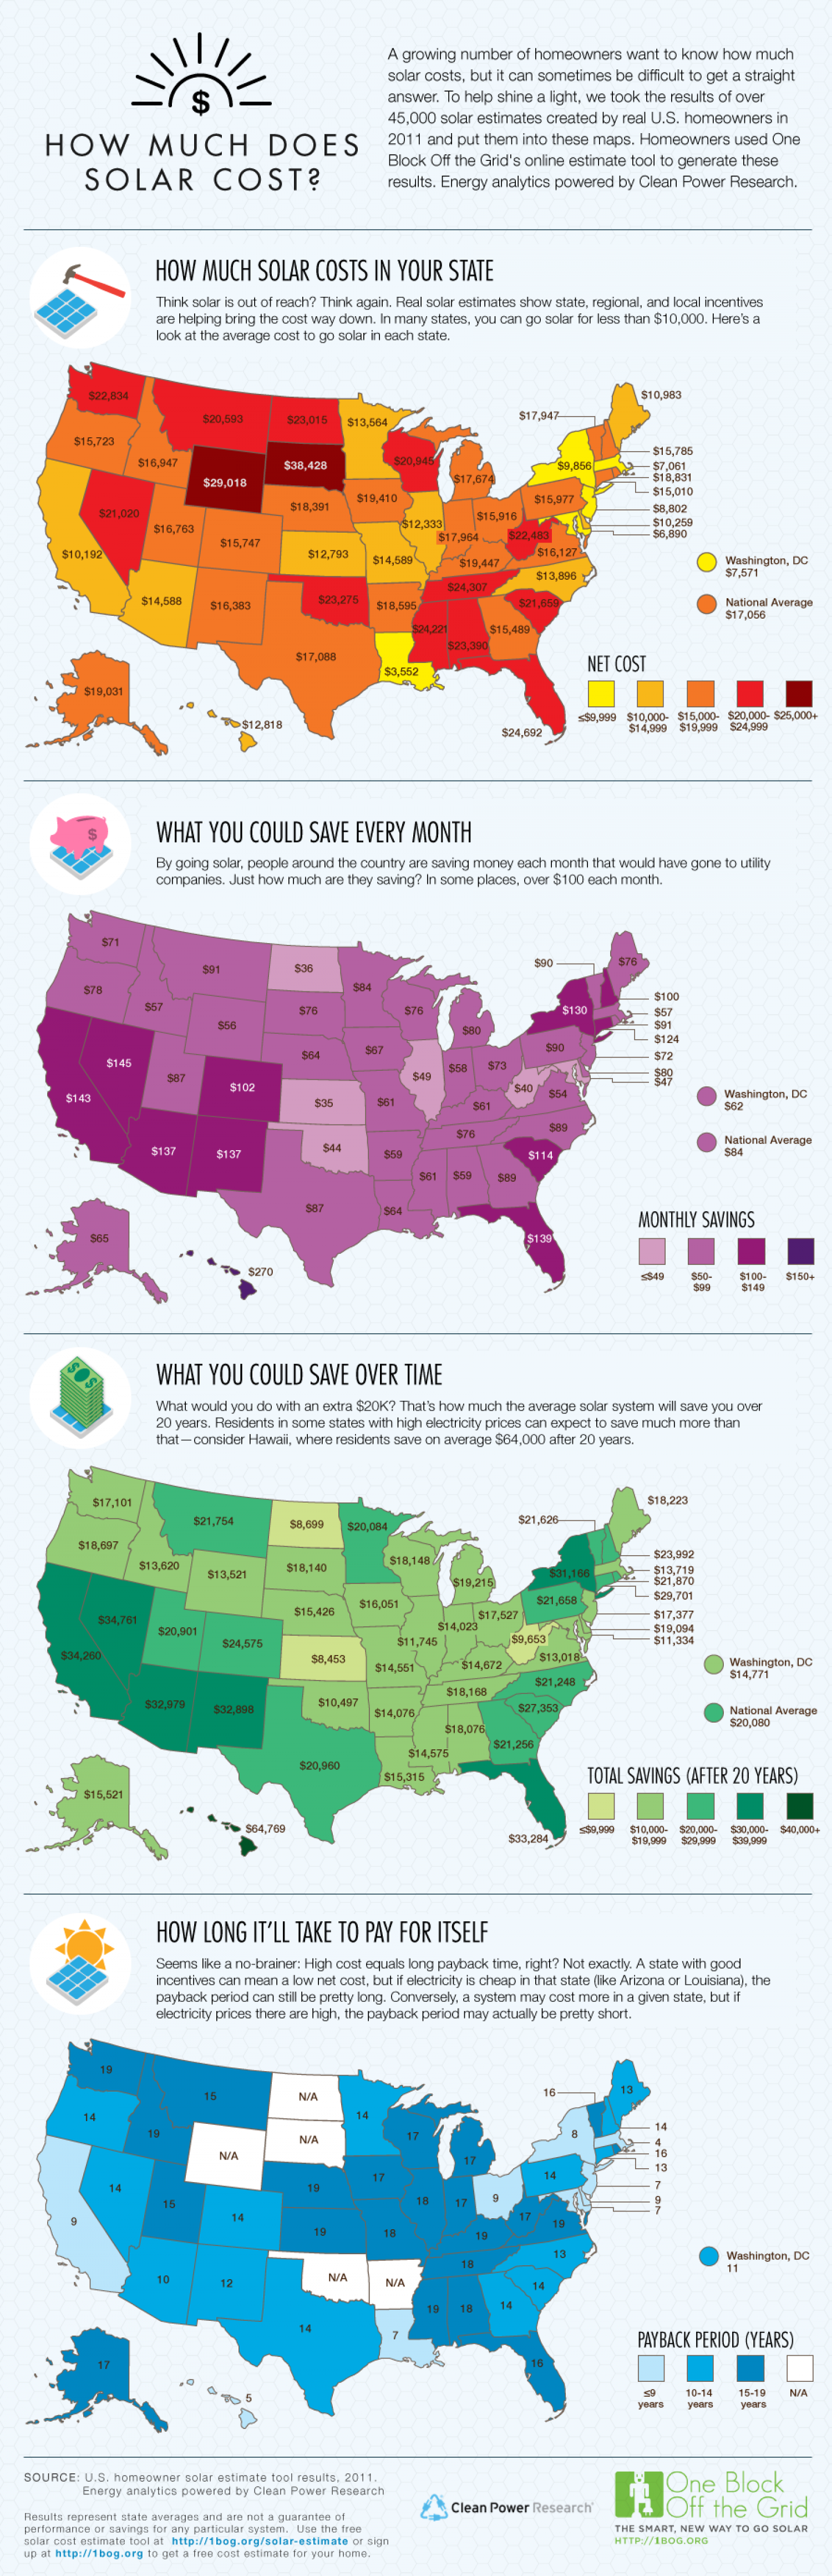 How Much Does Solar Cost? Infographic